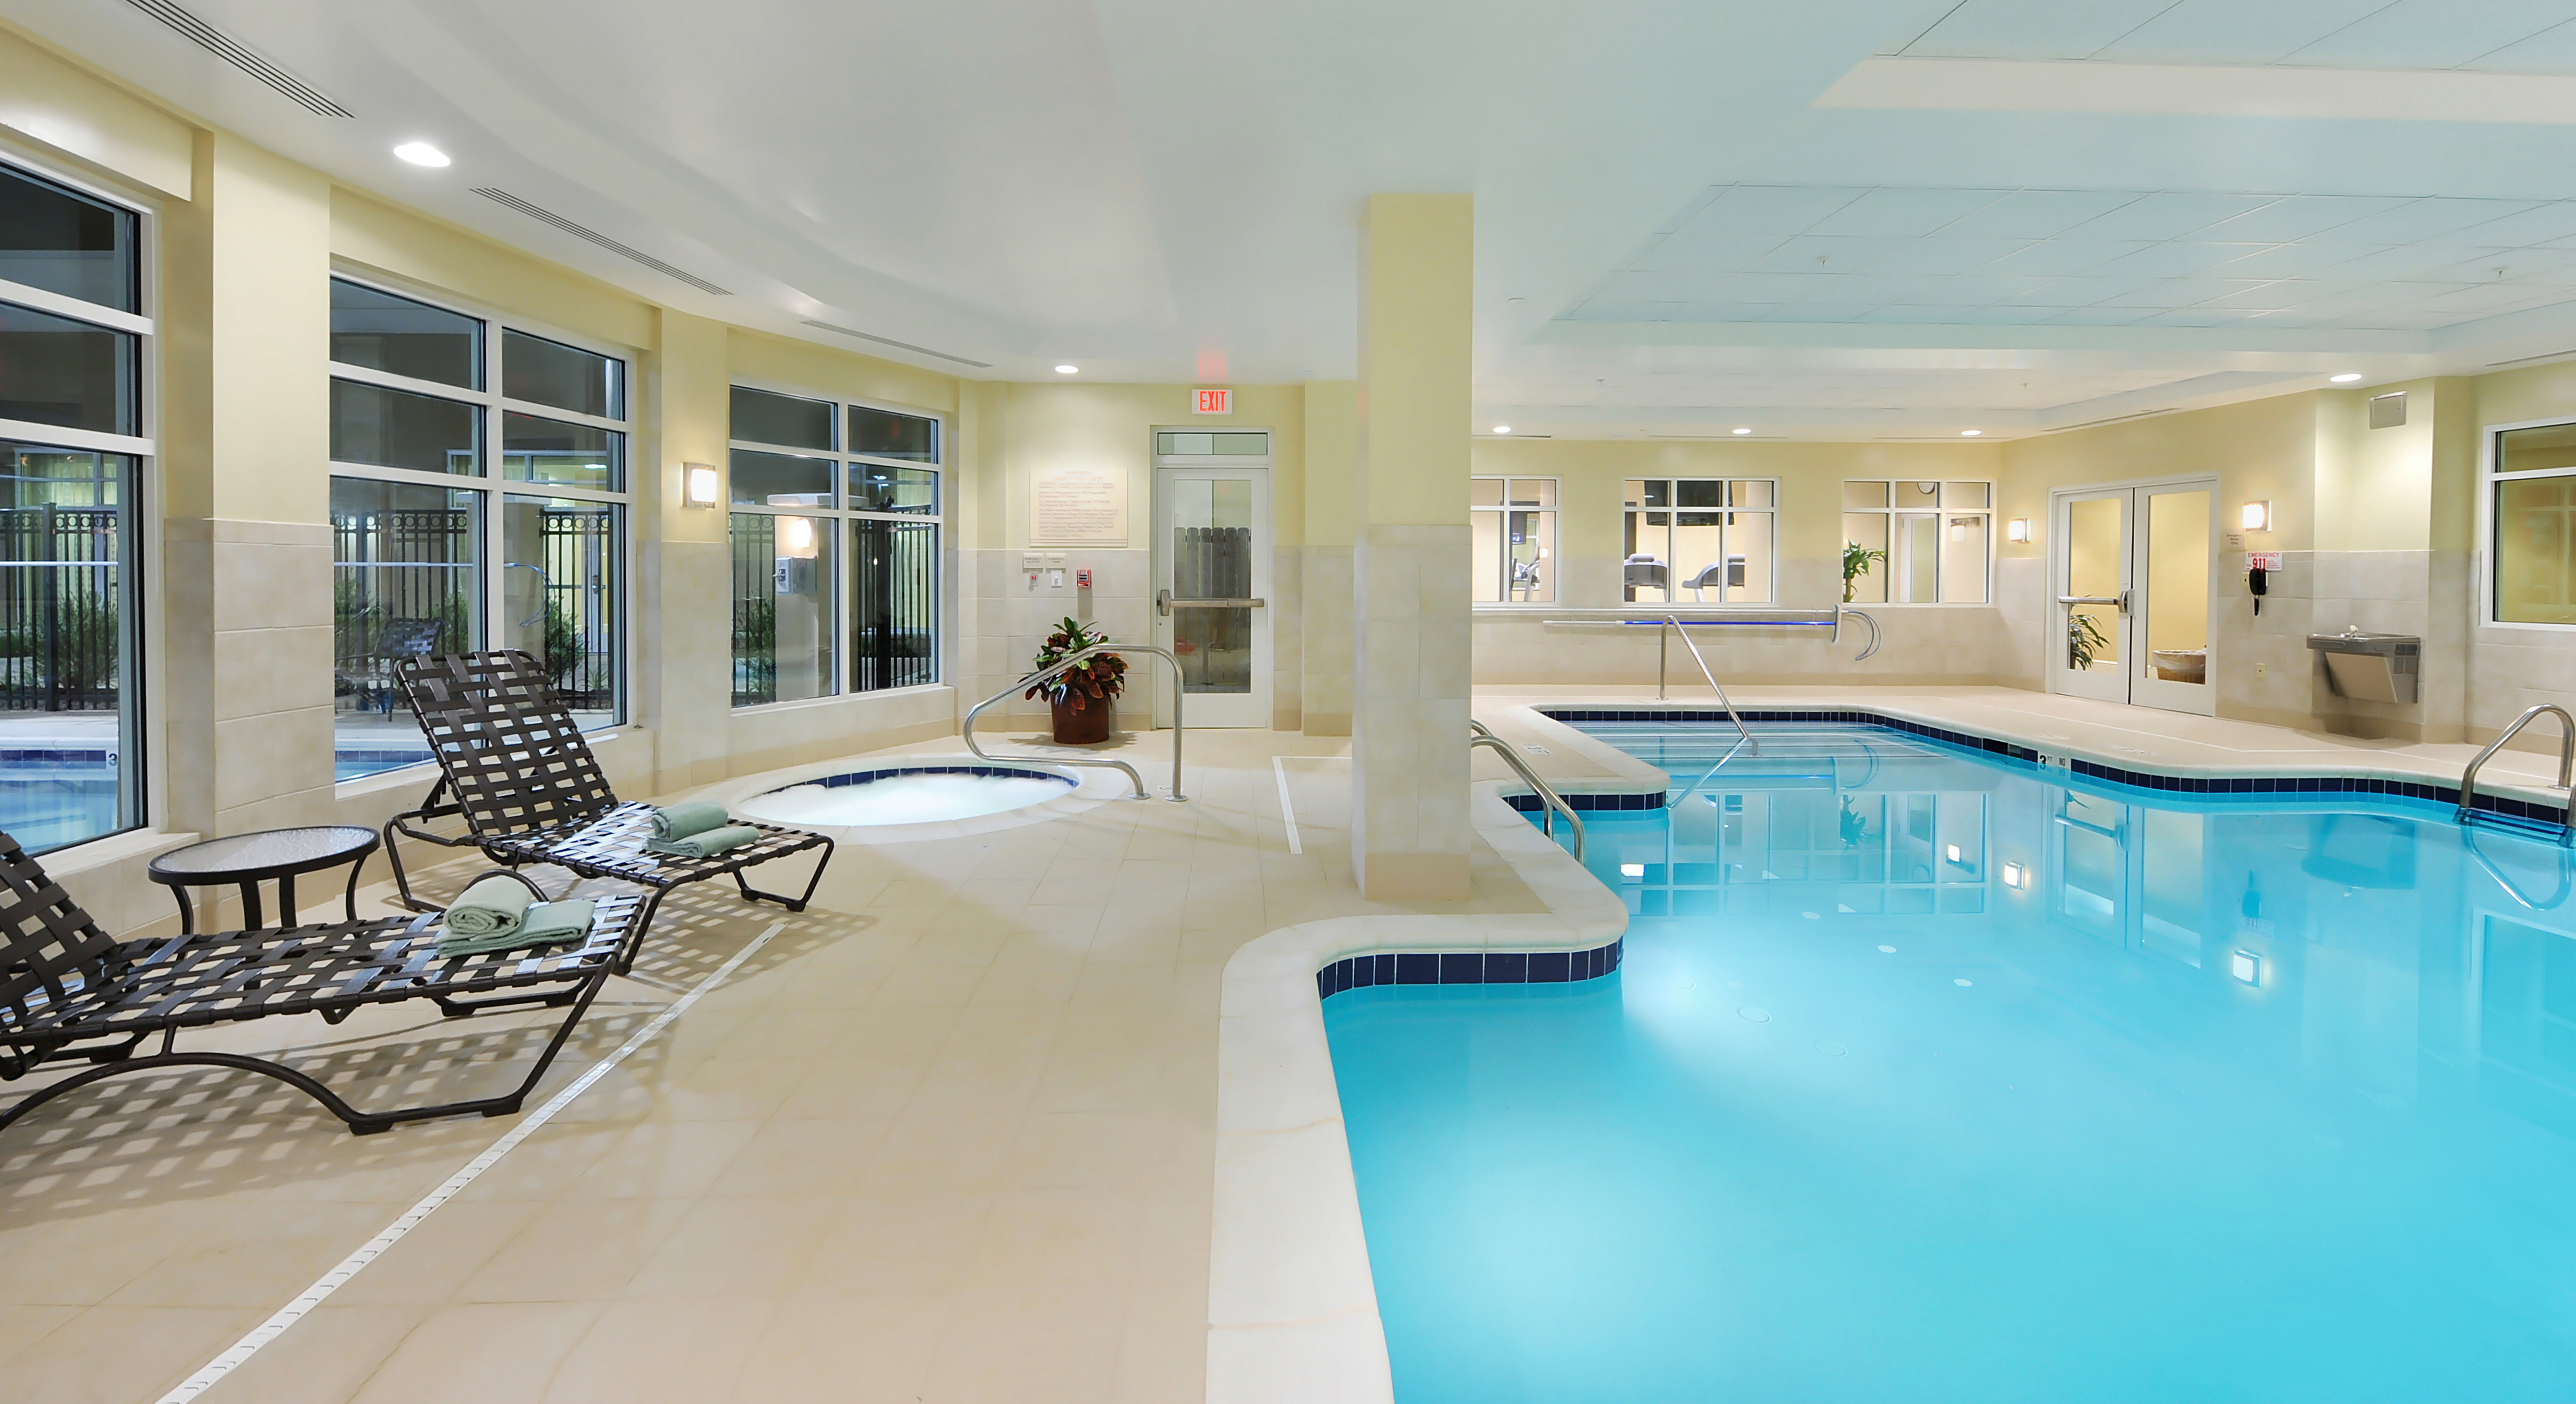 Indoor Swimming Pool & Seating Area  